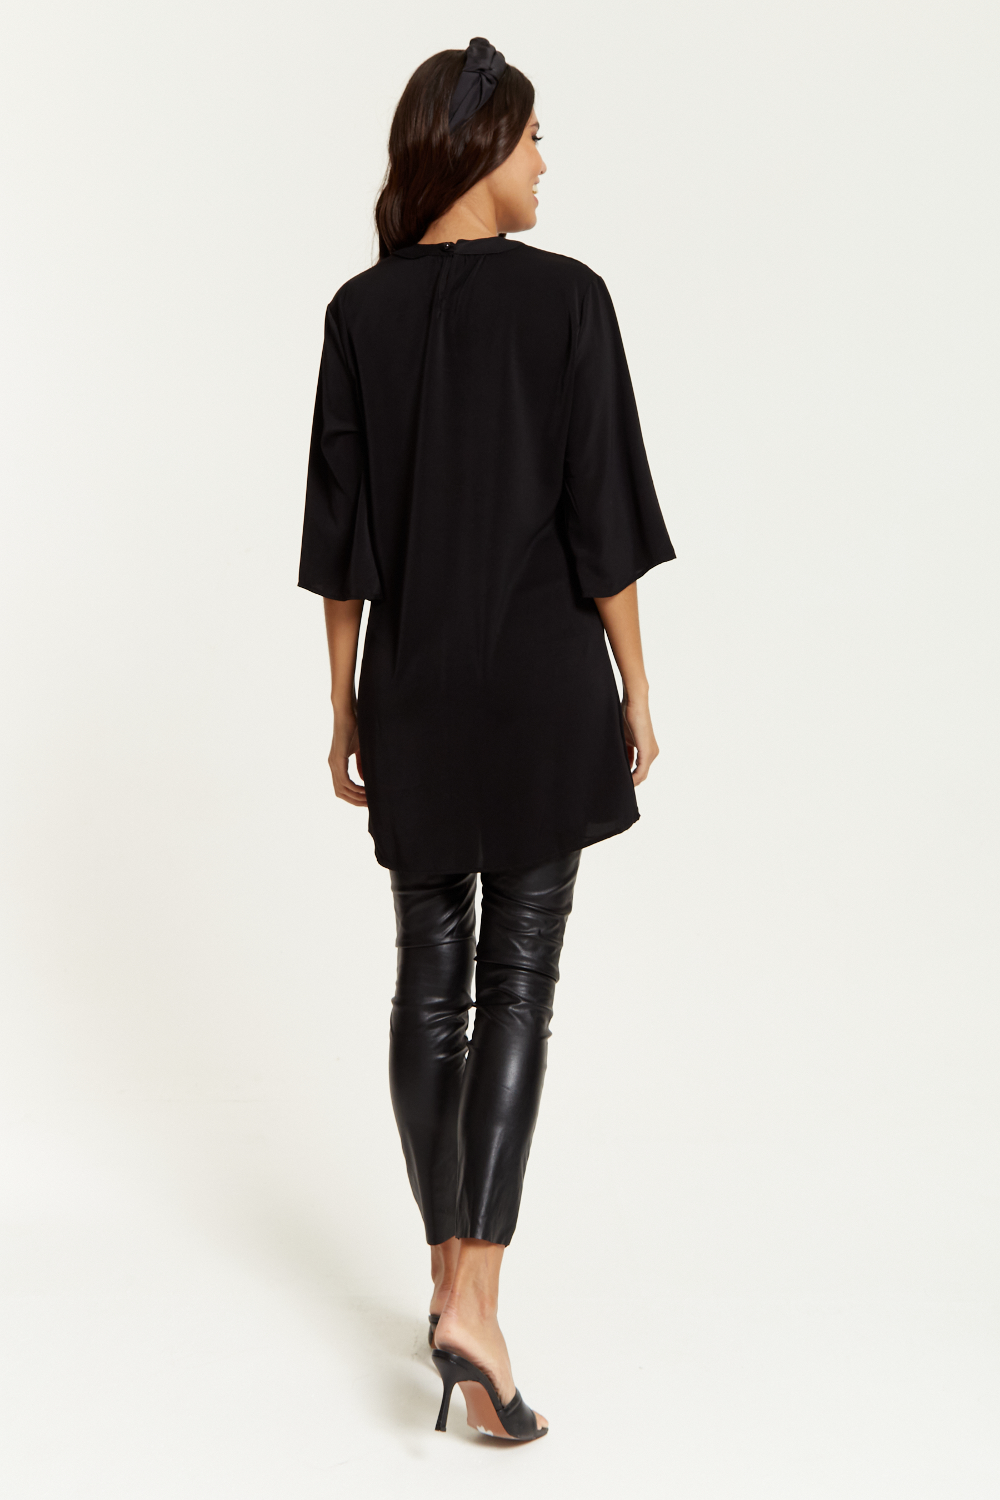 Oversized Detailed Neckline Tunic with 3/4 Sleeves in Black GLR FASHION NETWORKING